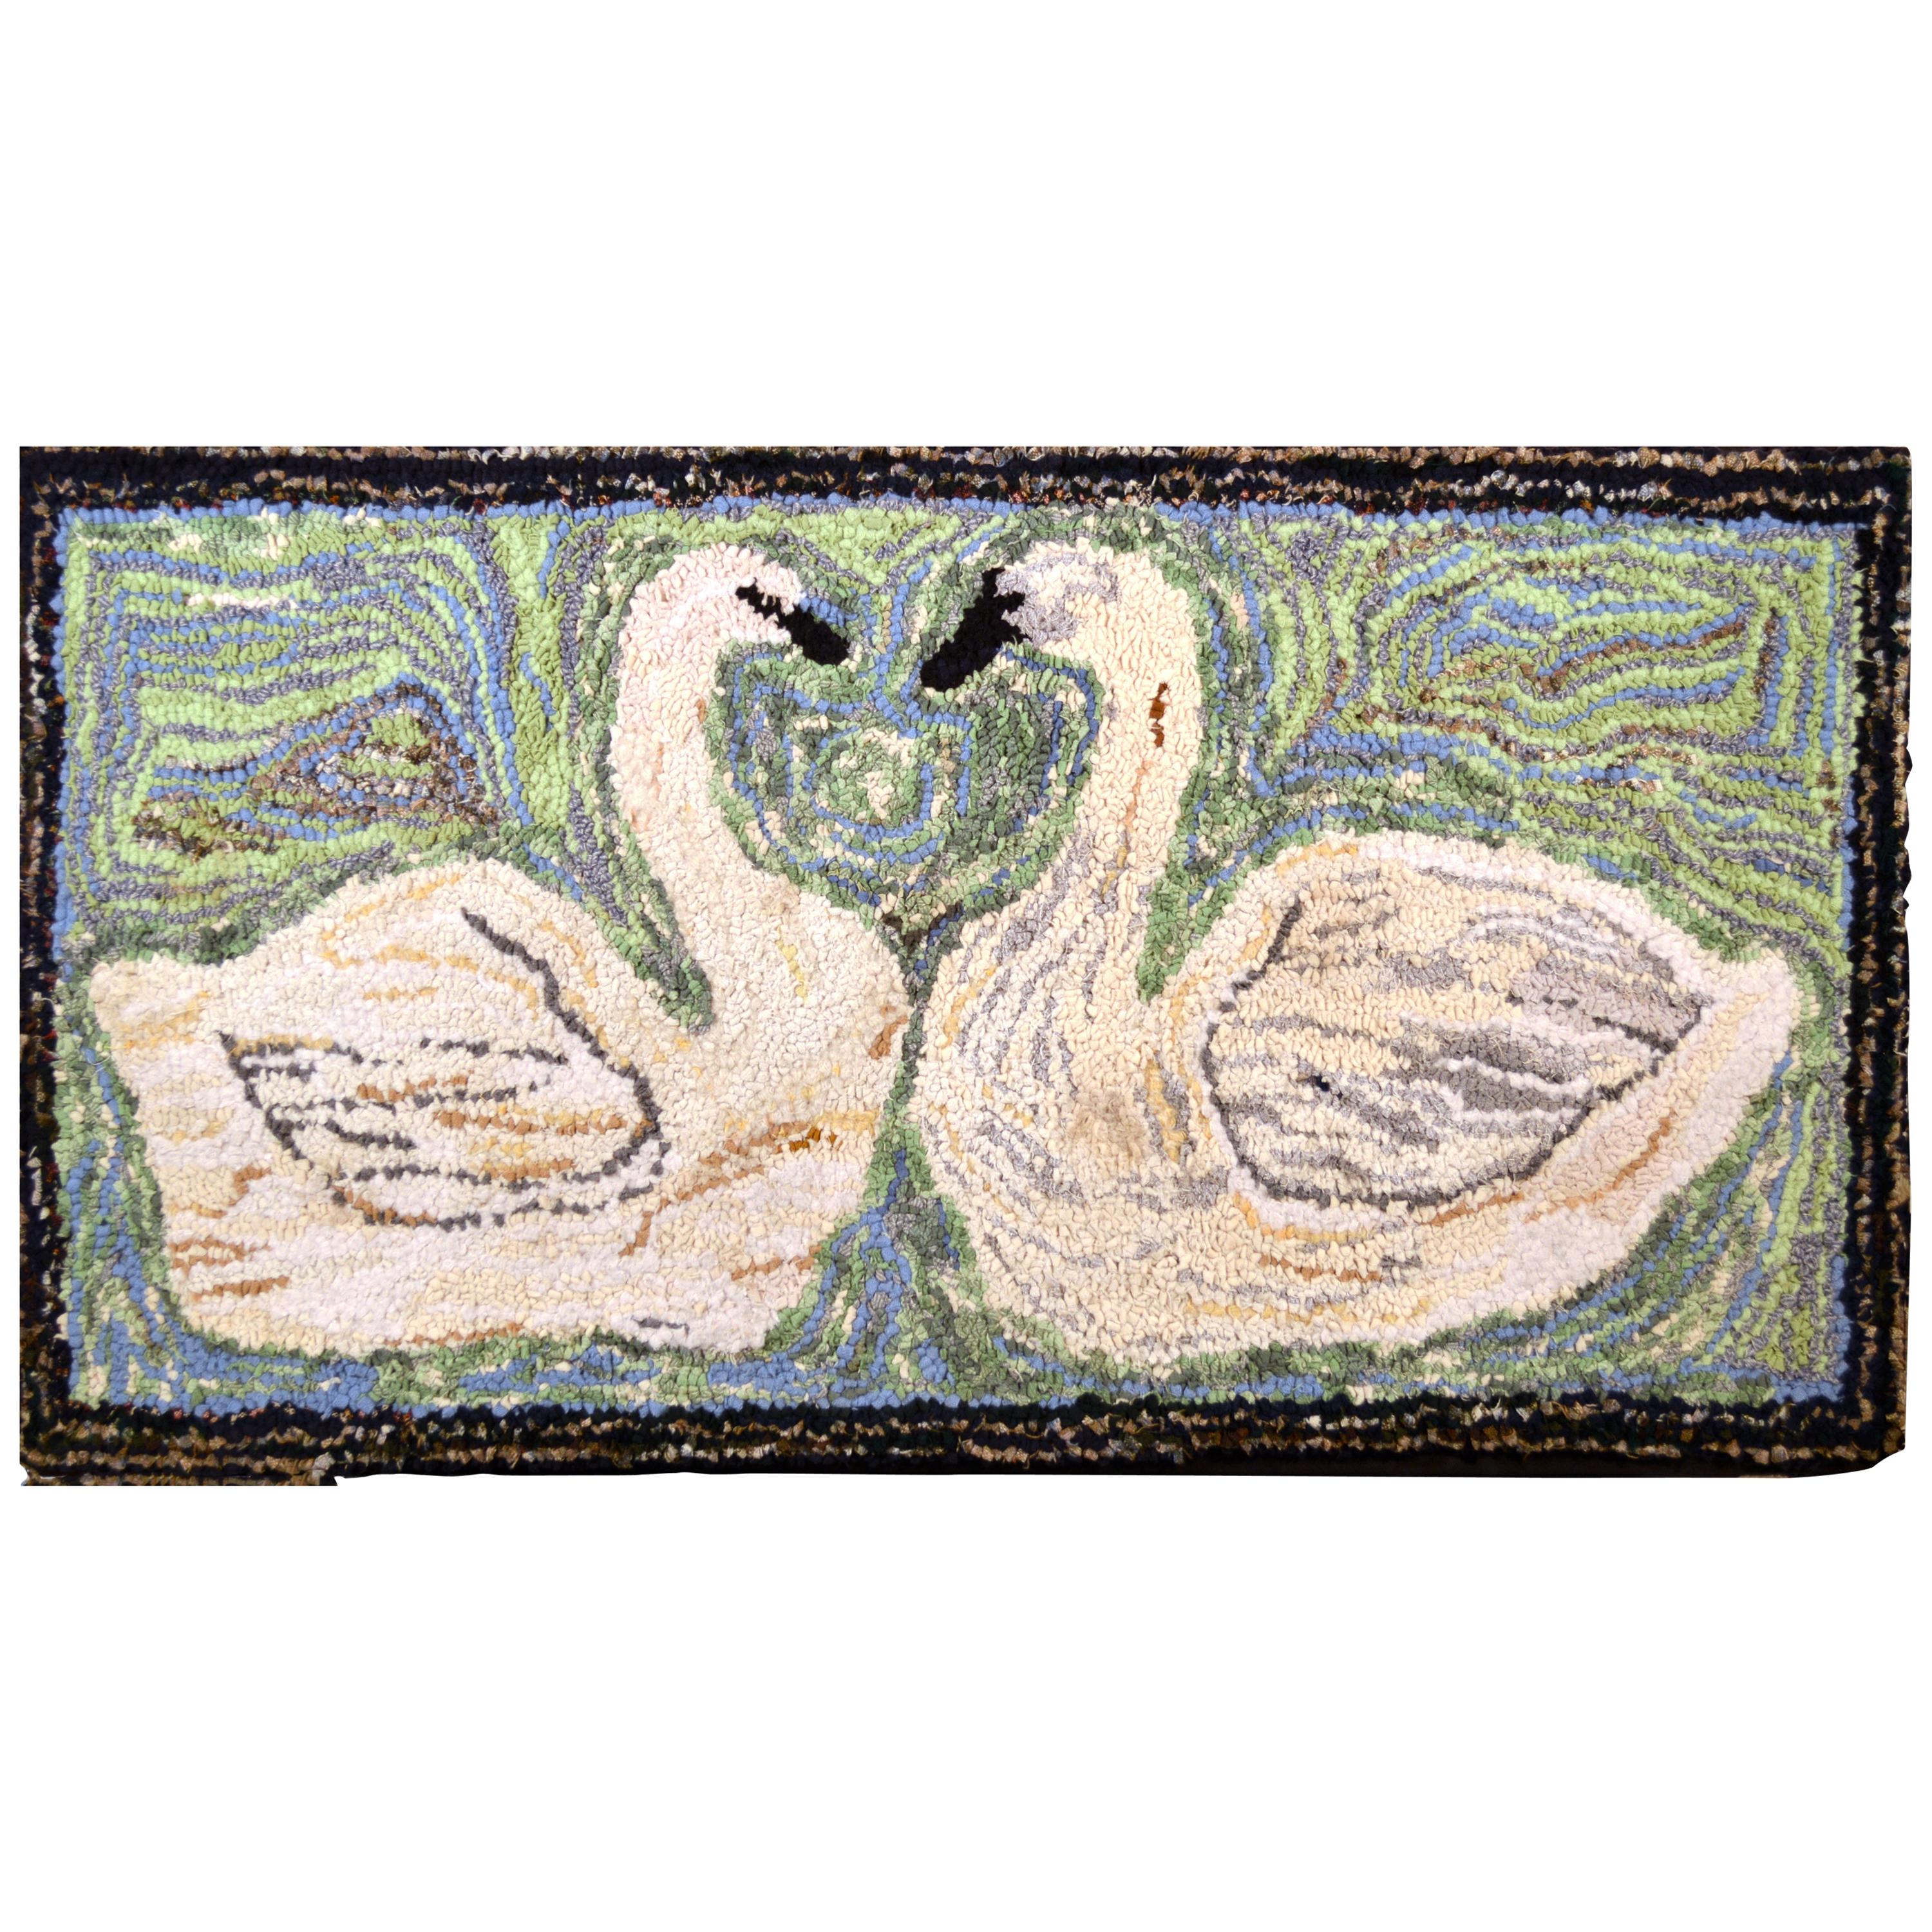 American Hooked Rug with a Pair of Swans